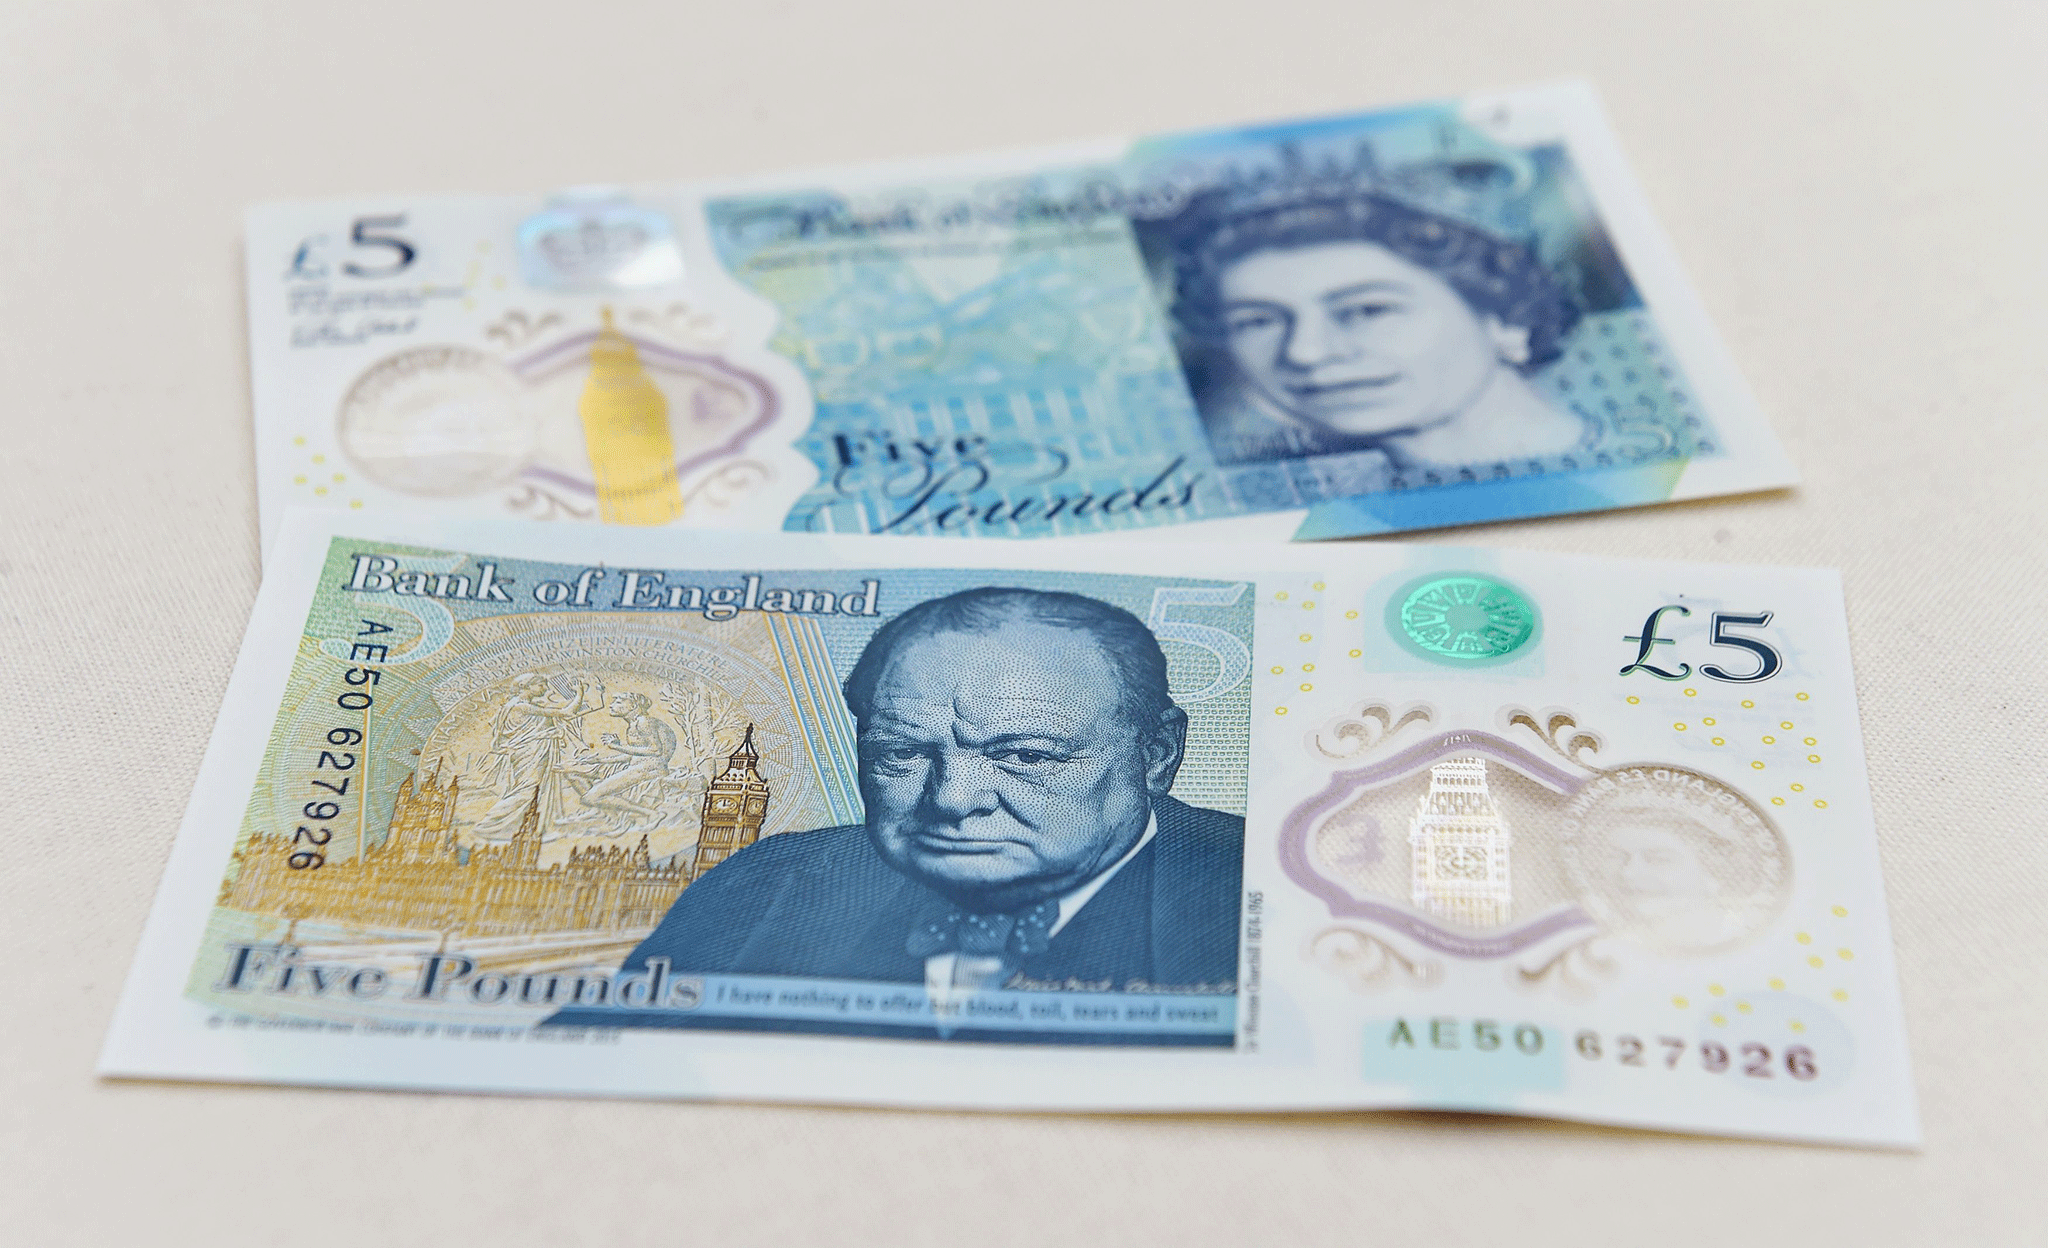 The new £5 note contains traces of animal fat